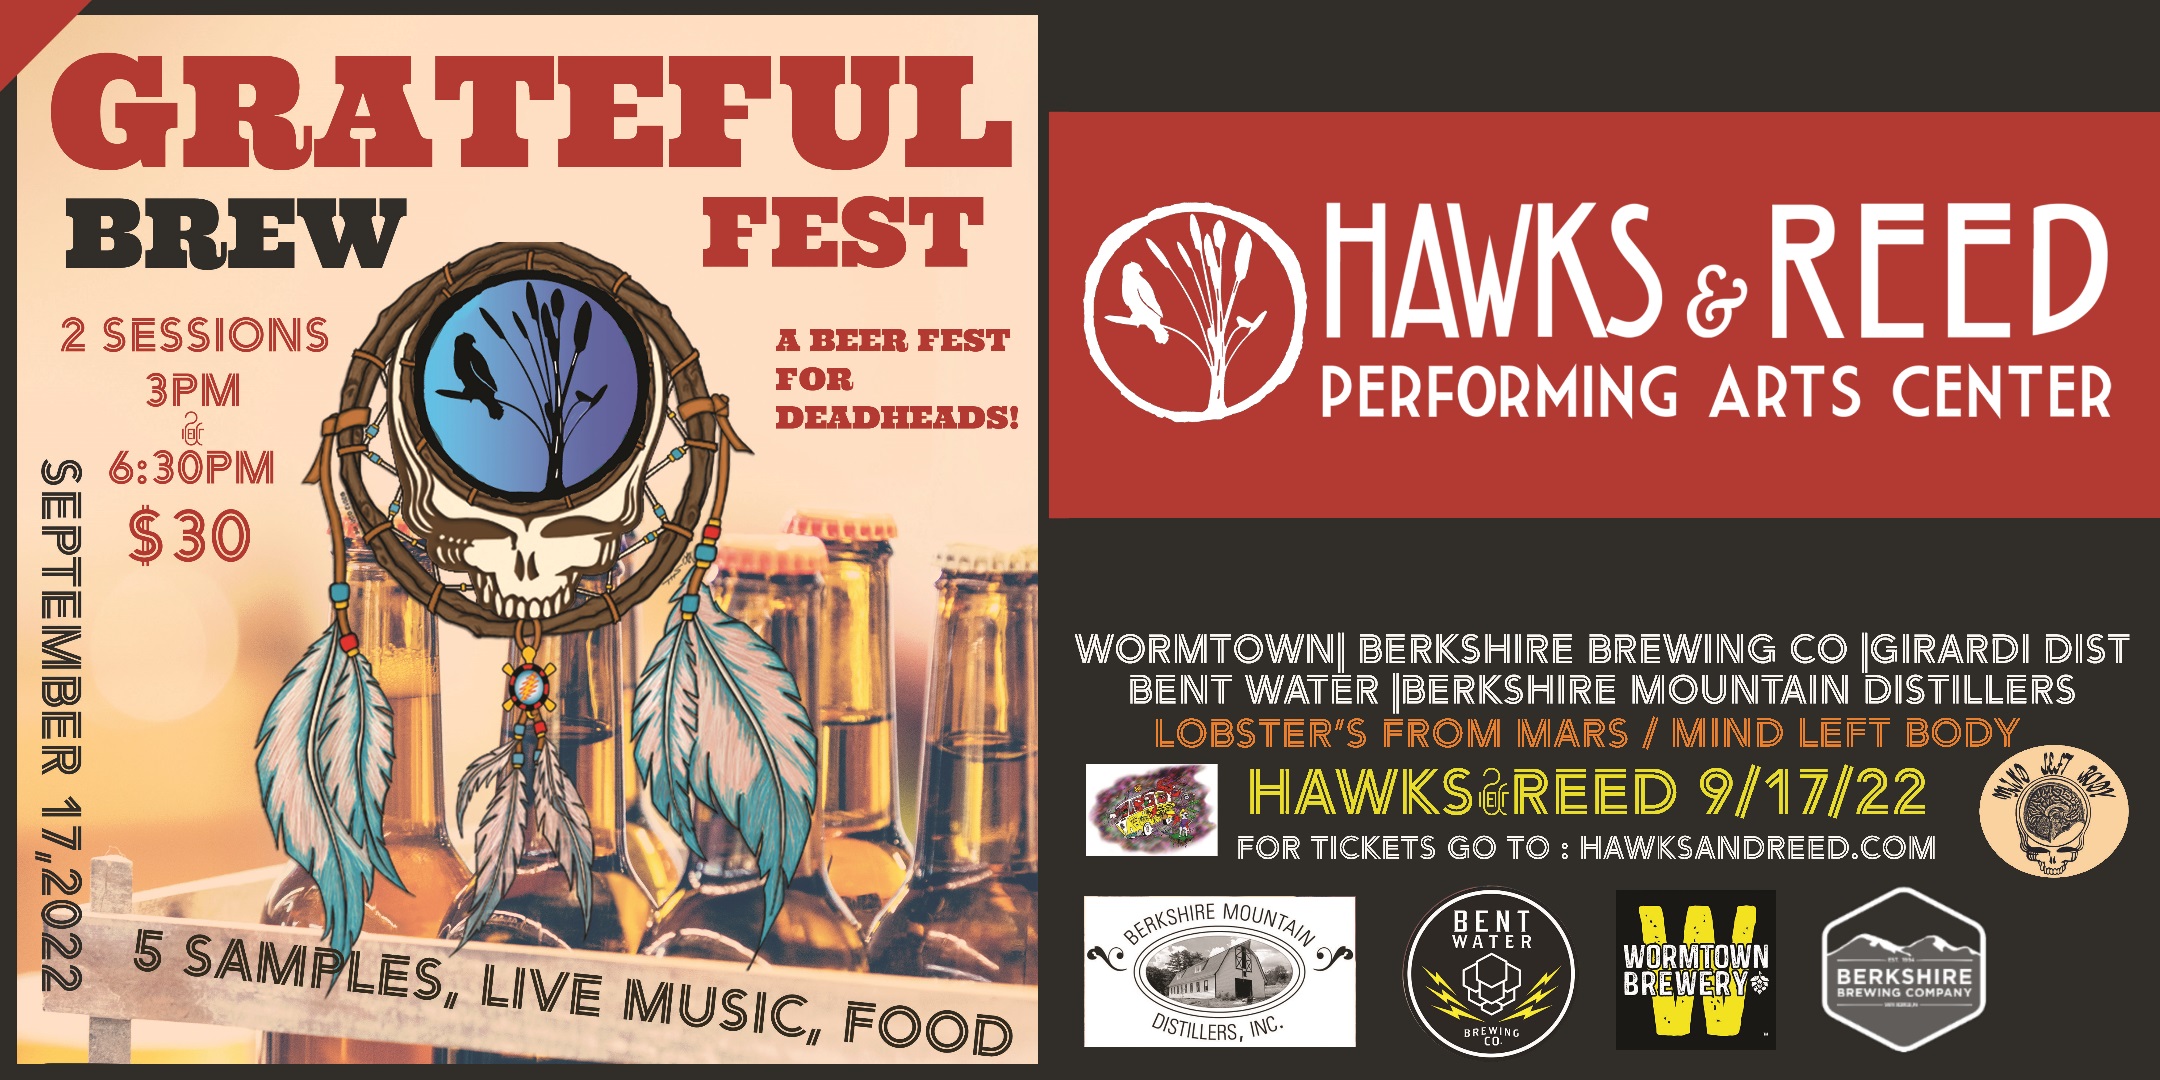 The Grateful Brew Fest at Hawks & Reed – Afternoon Session